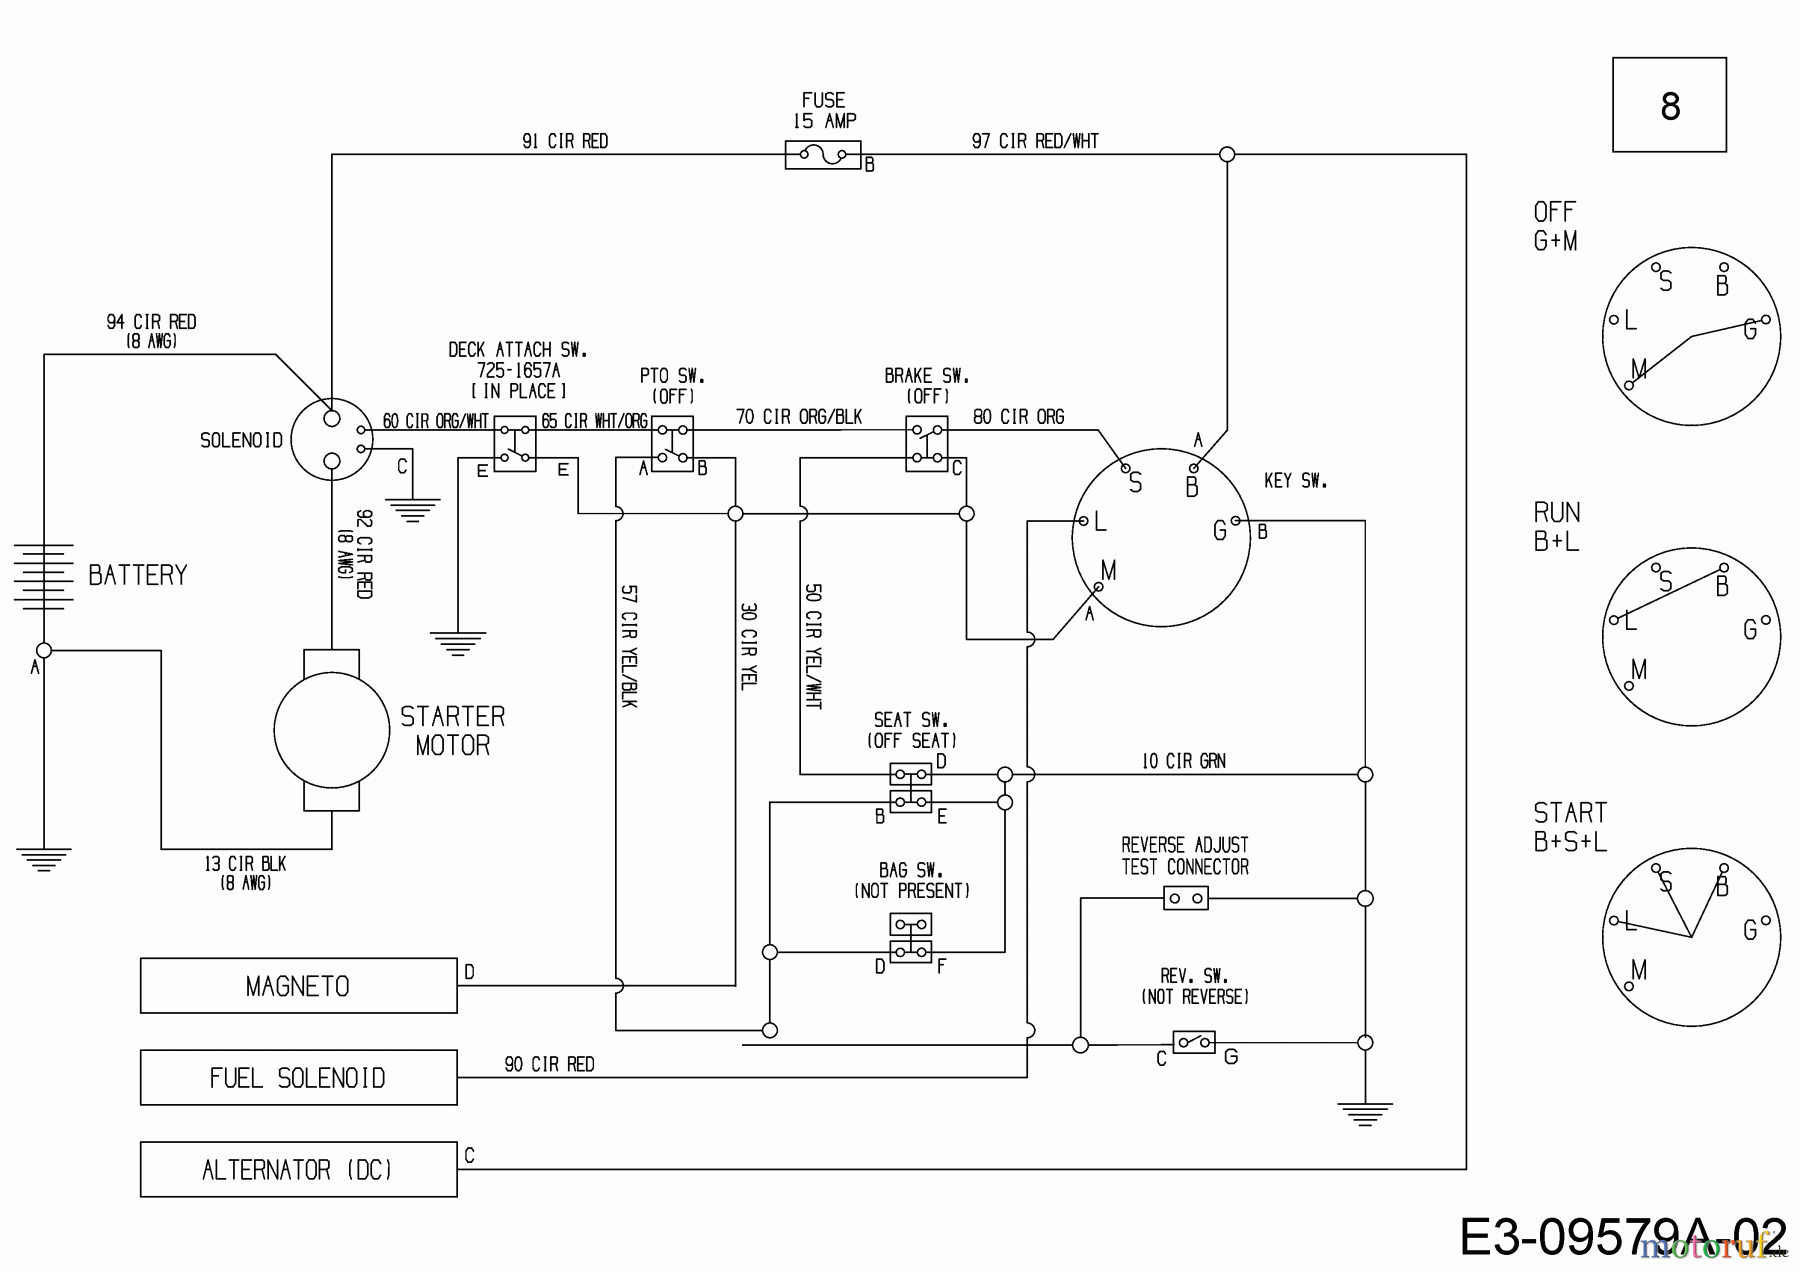  Wolf-Garten Lawn tractors Scooter Hydro 13A221SD650  (2016) Wiring diagram